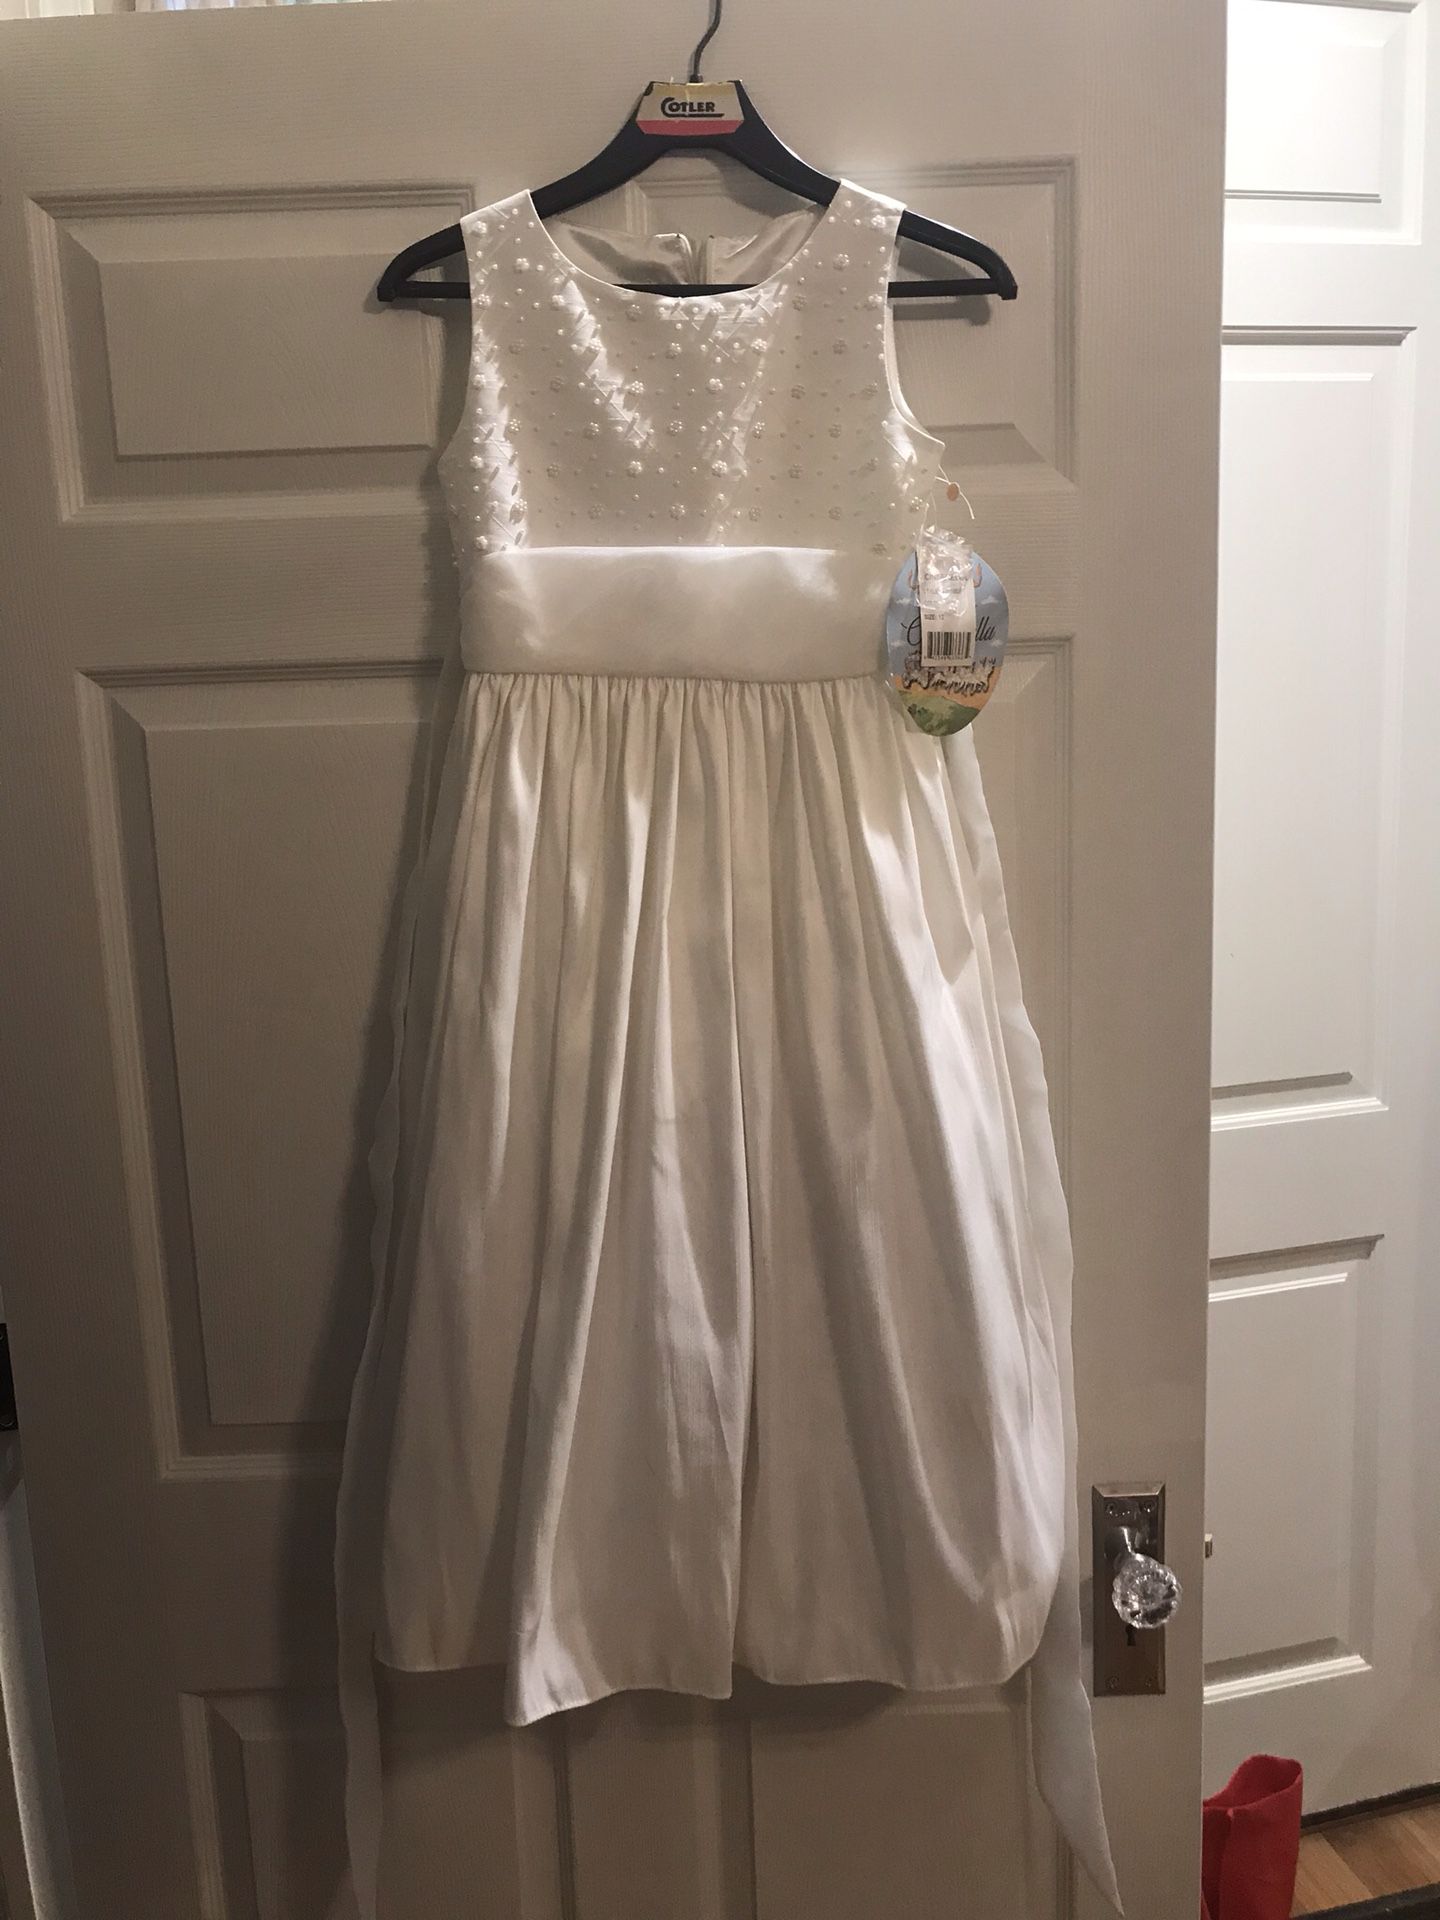 Cinderella Brand Size 12 Ivory Flower Girl Dress New with Tags